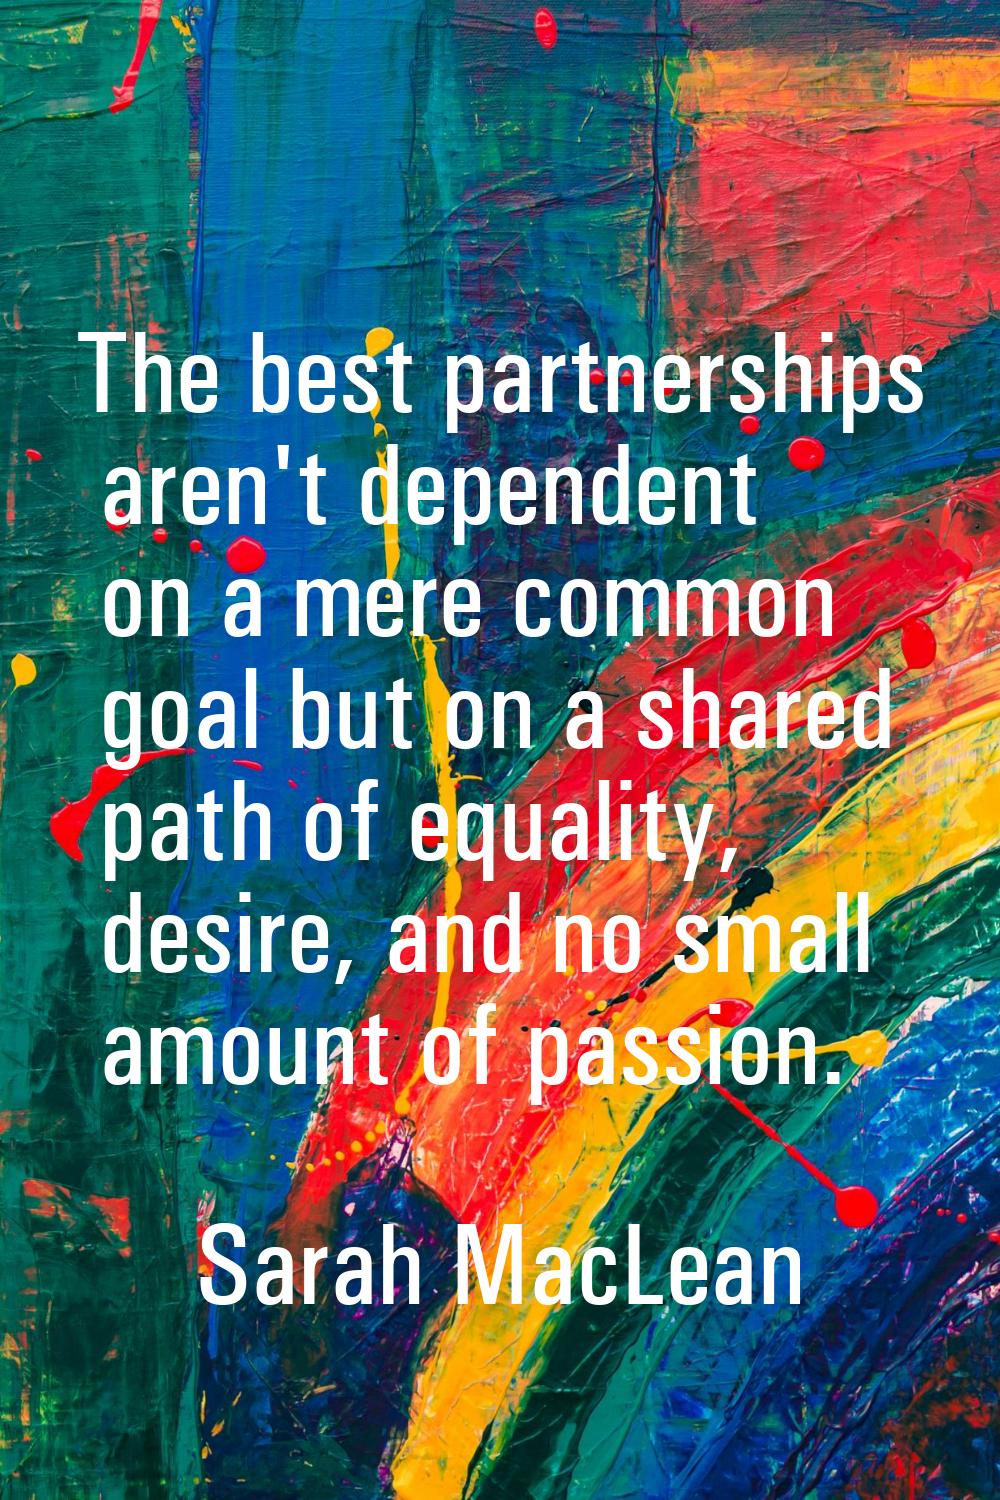 The best partnerships aren't dependent on a mere common goal but on a shared path of equality, desi